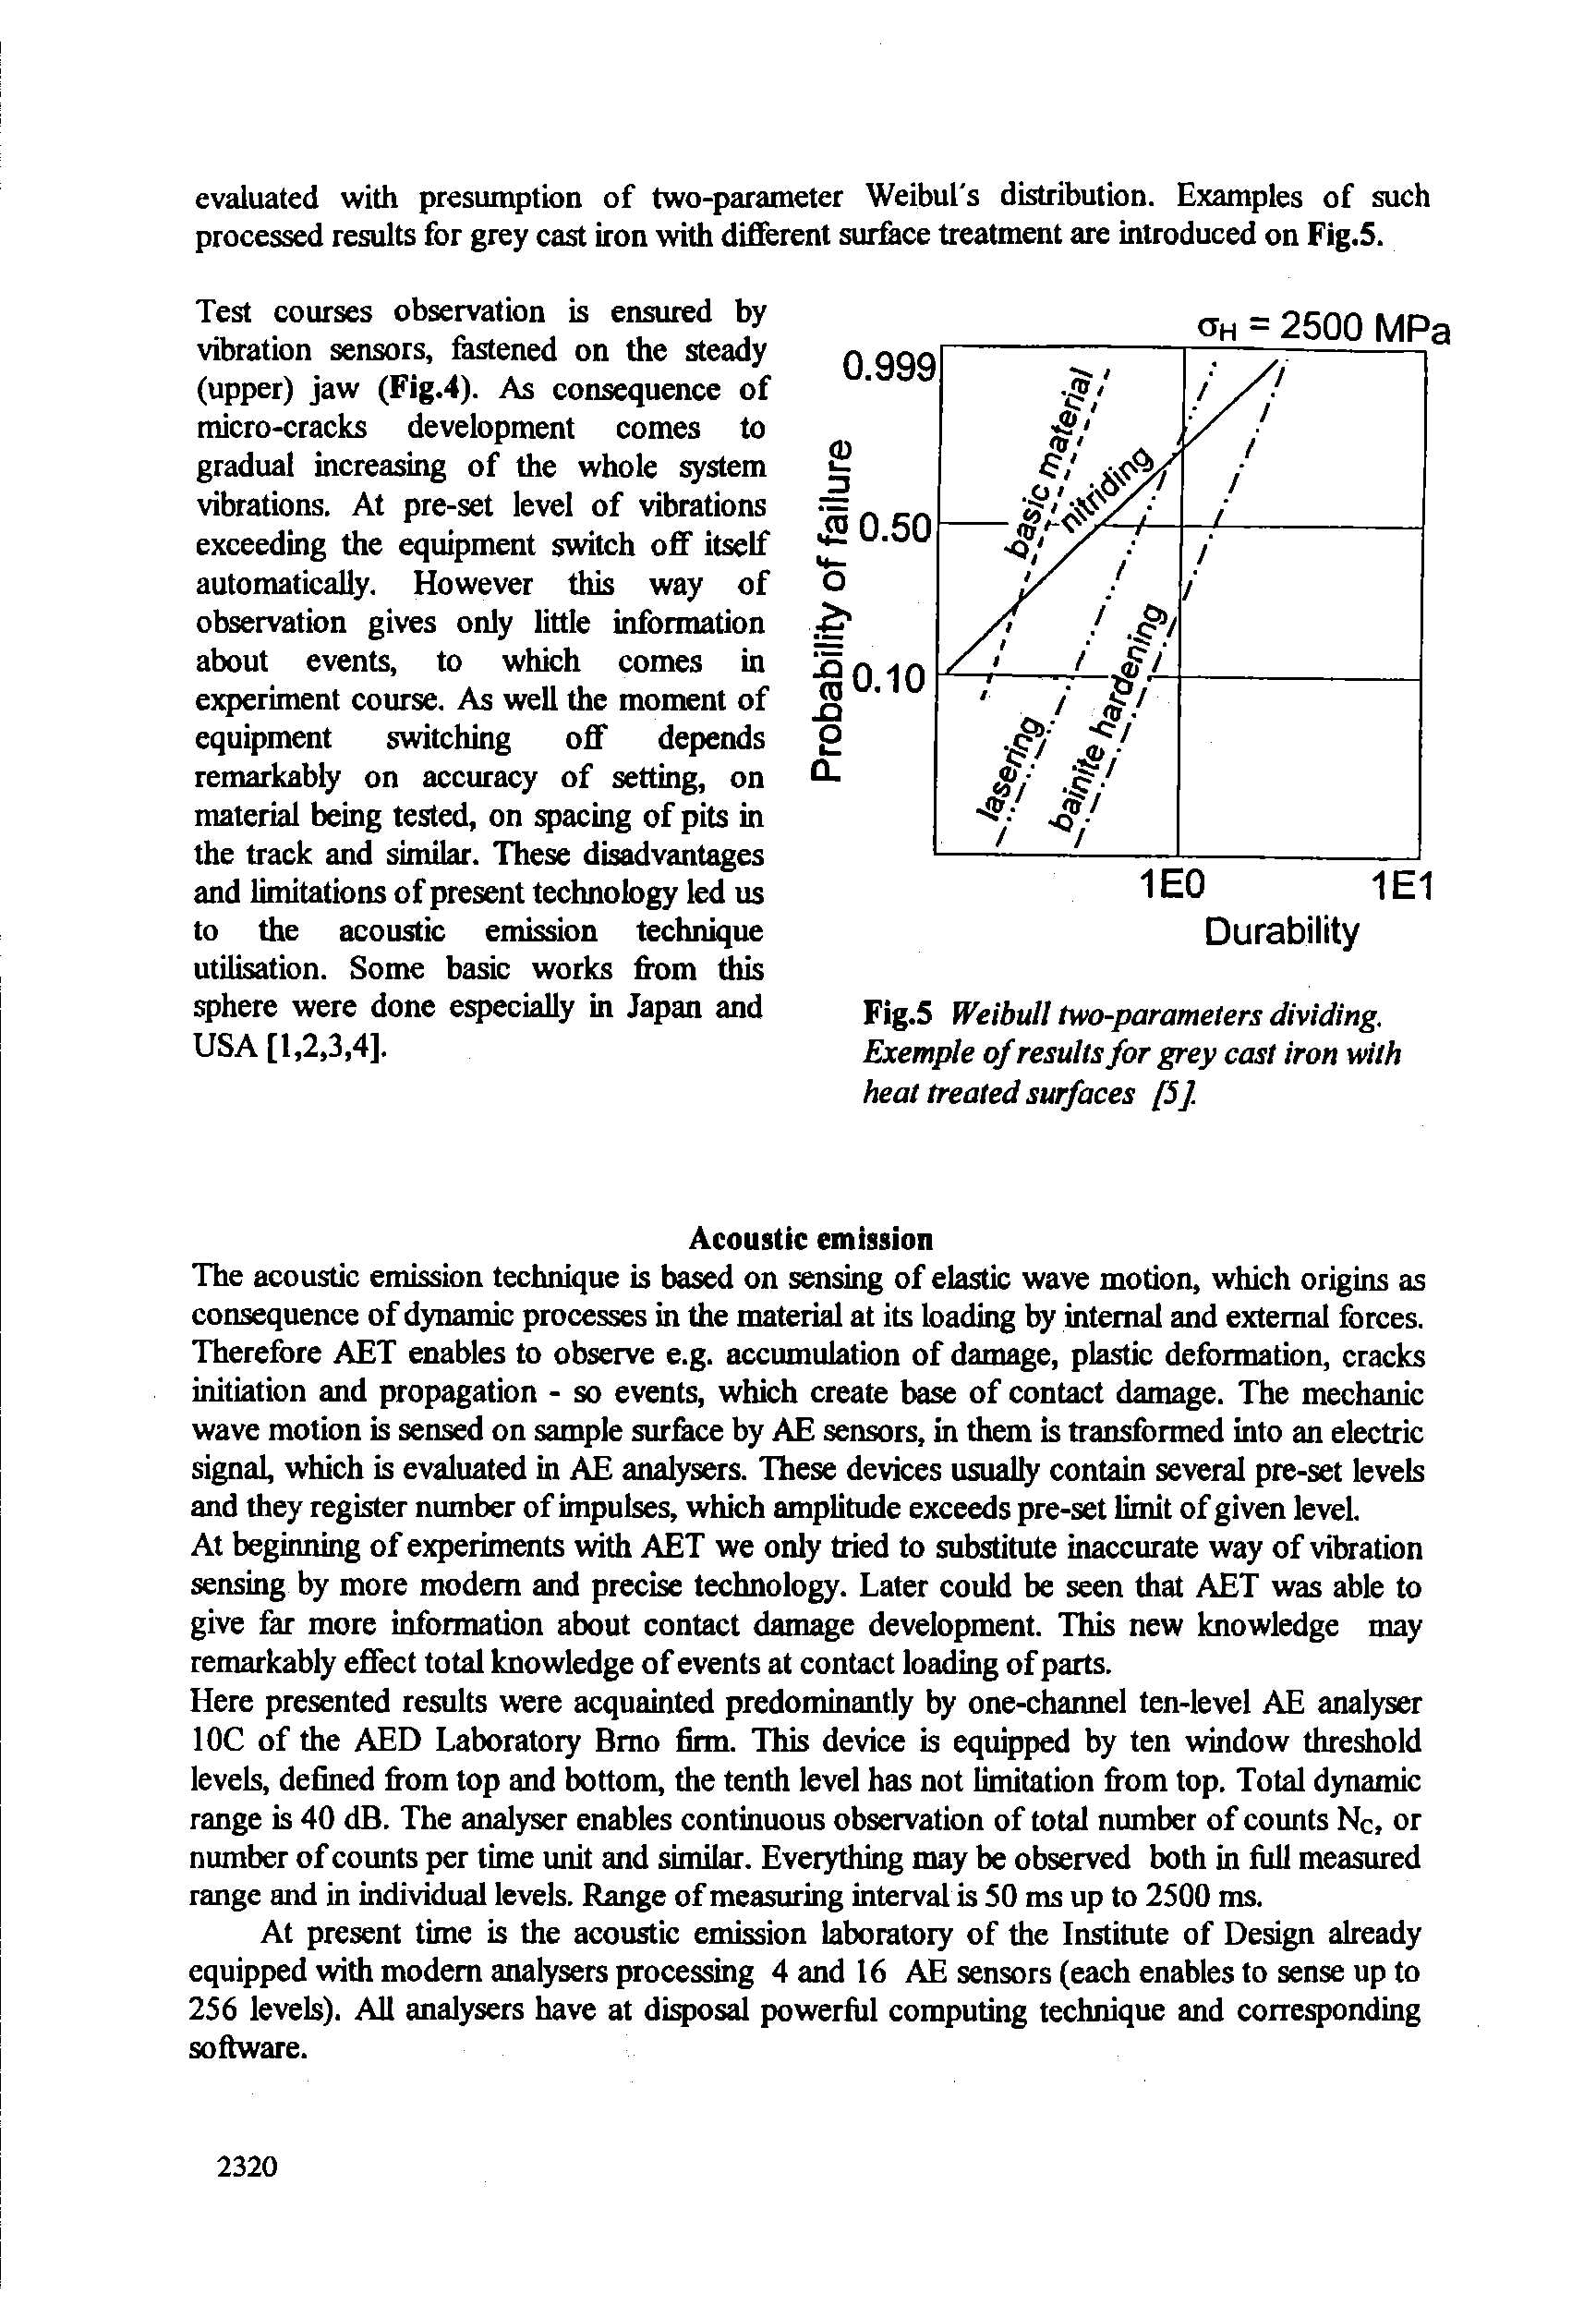 Fig.5 Weibull two-parameters dividing. Exemple of results for grey cast iron with heat treated surfaces [5],...